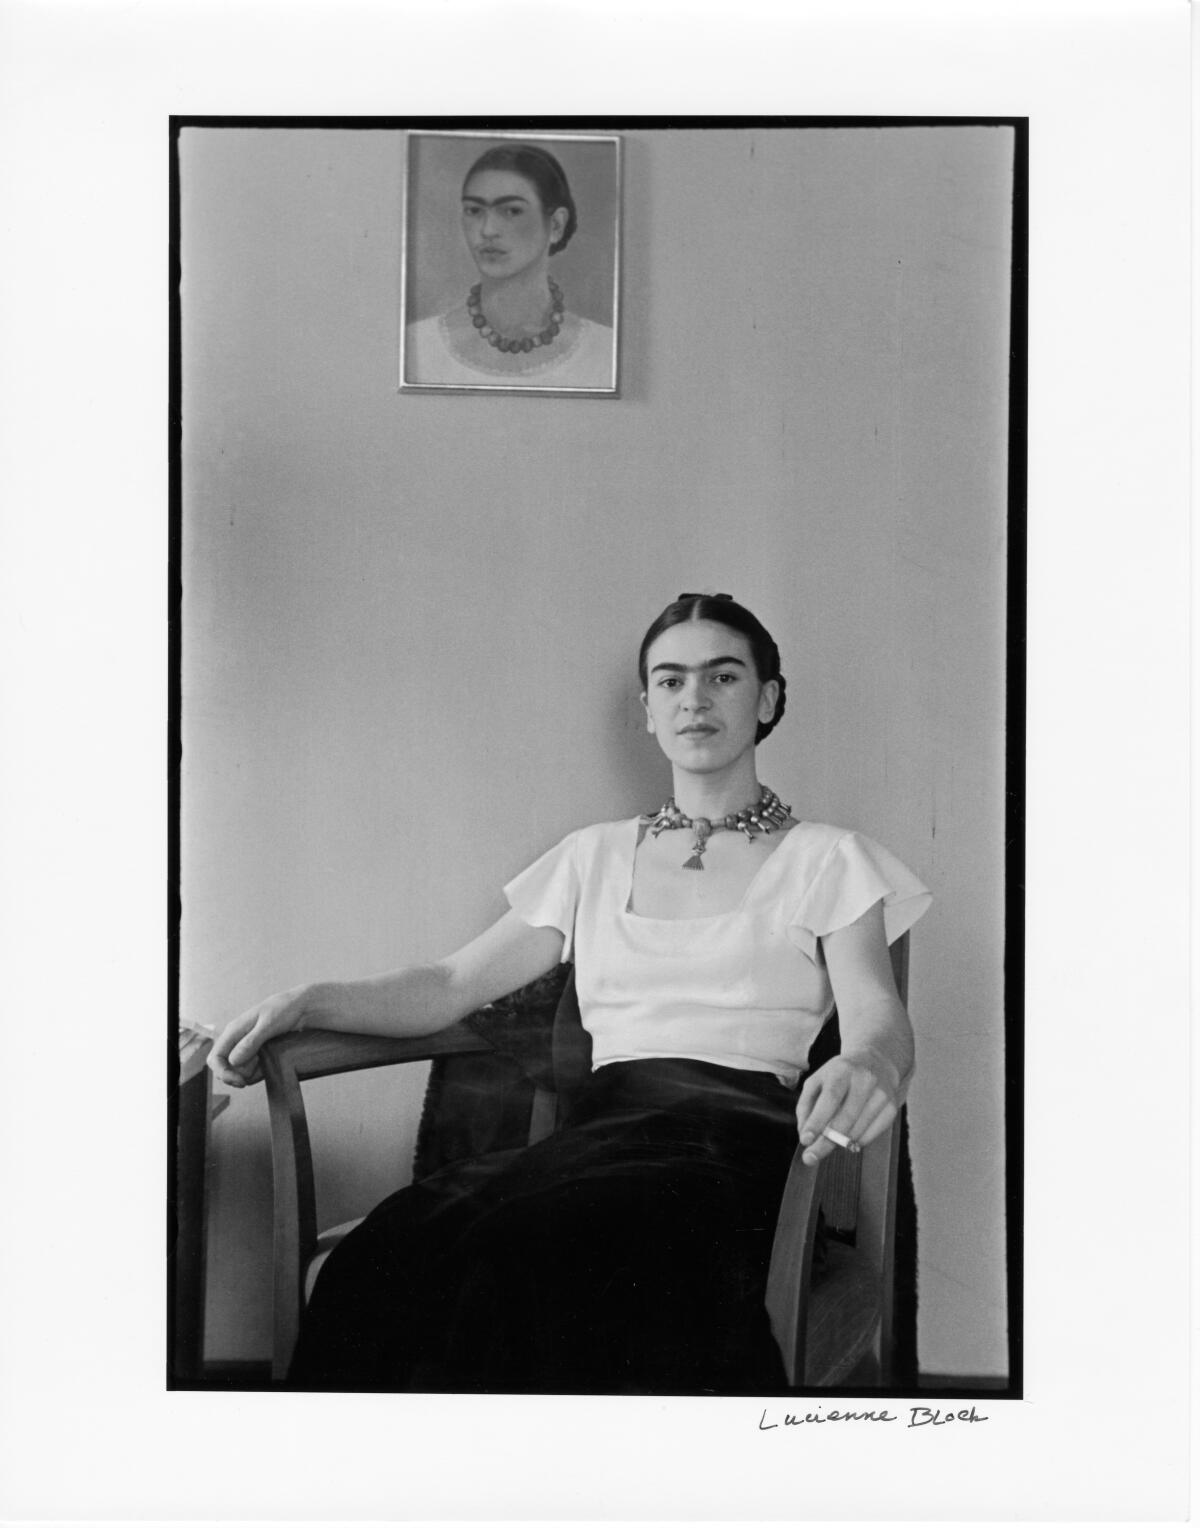 A youthful Frida Kahlo sits smoking in a bare room underneath one of her self-portraits in a vintage black and white photo.